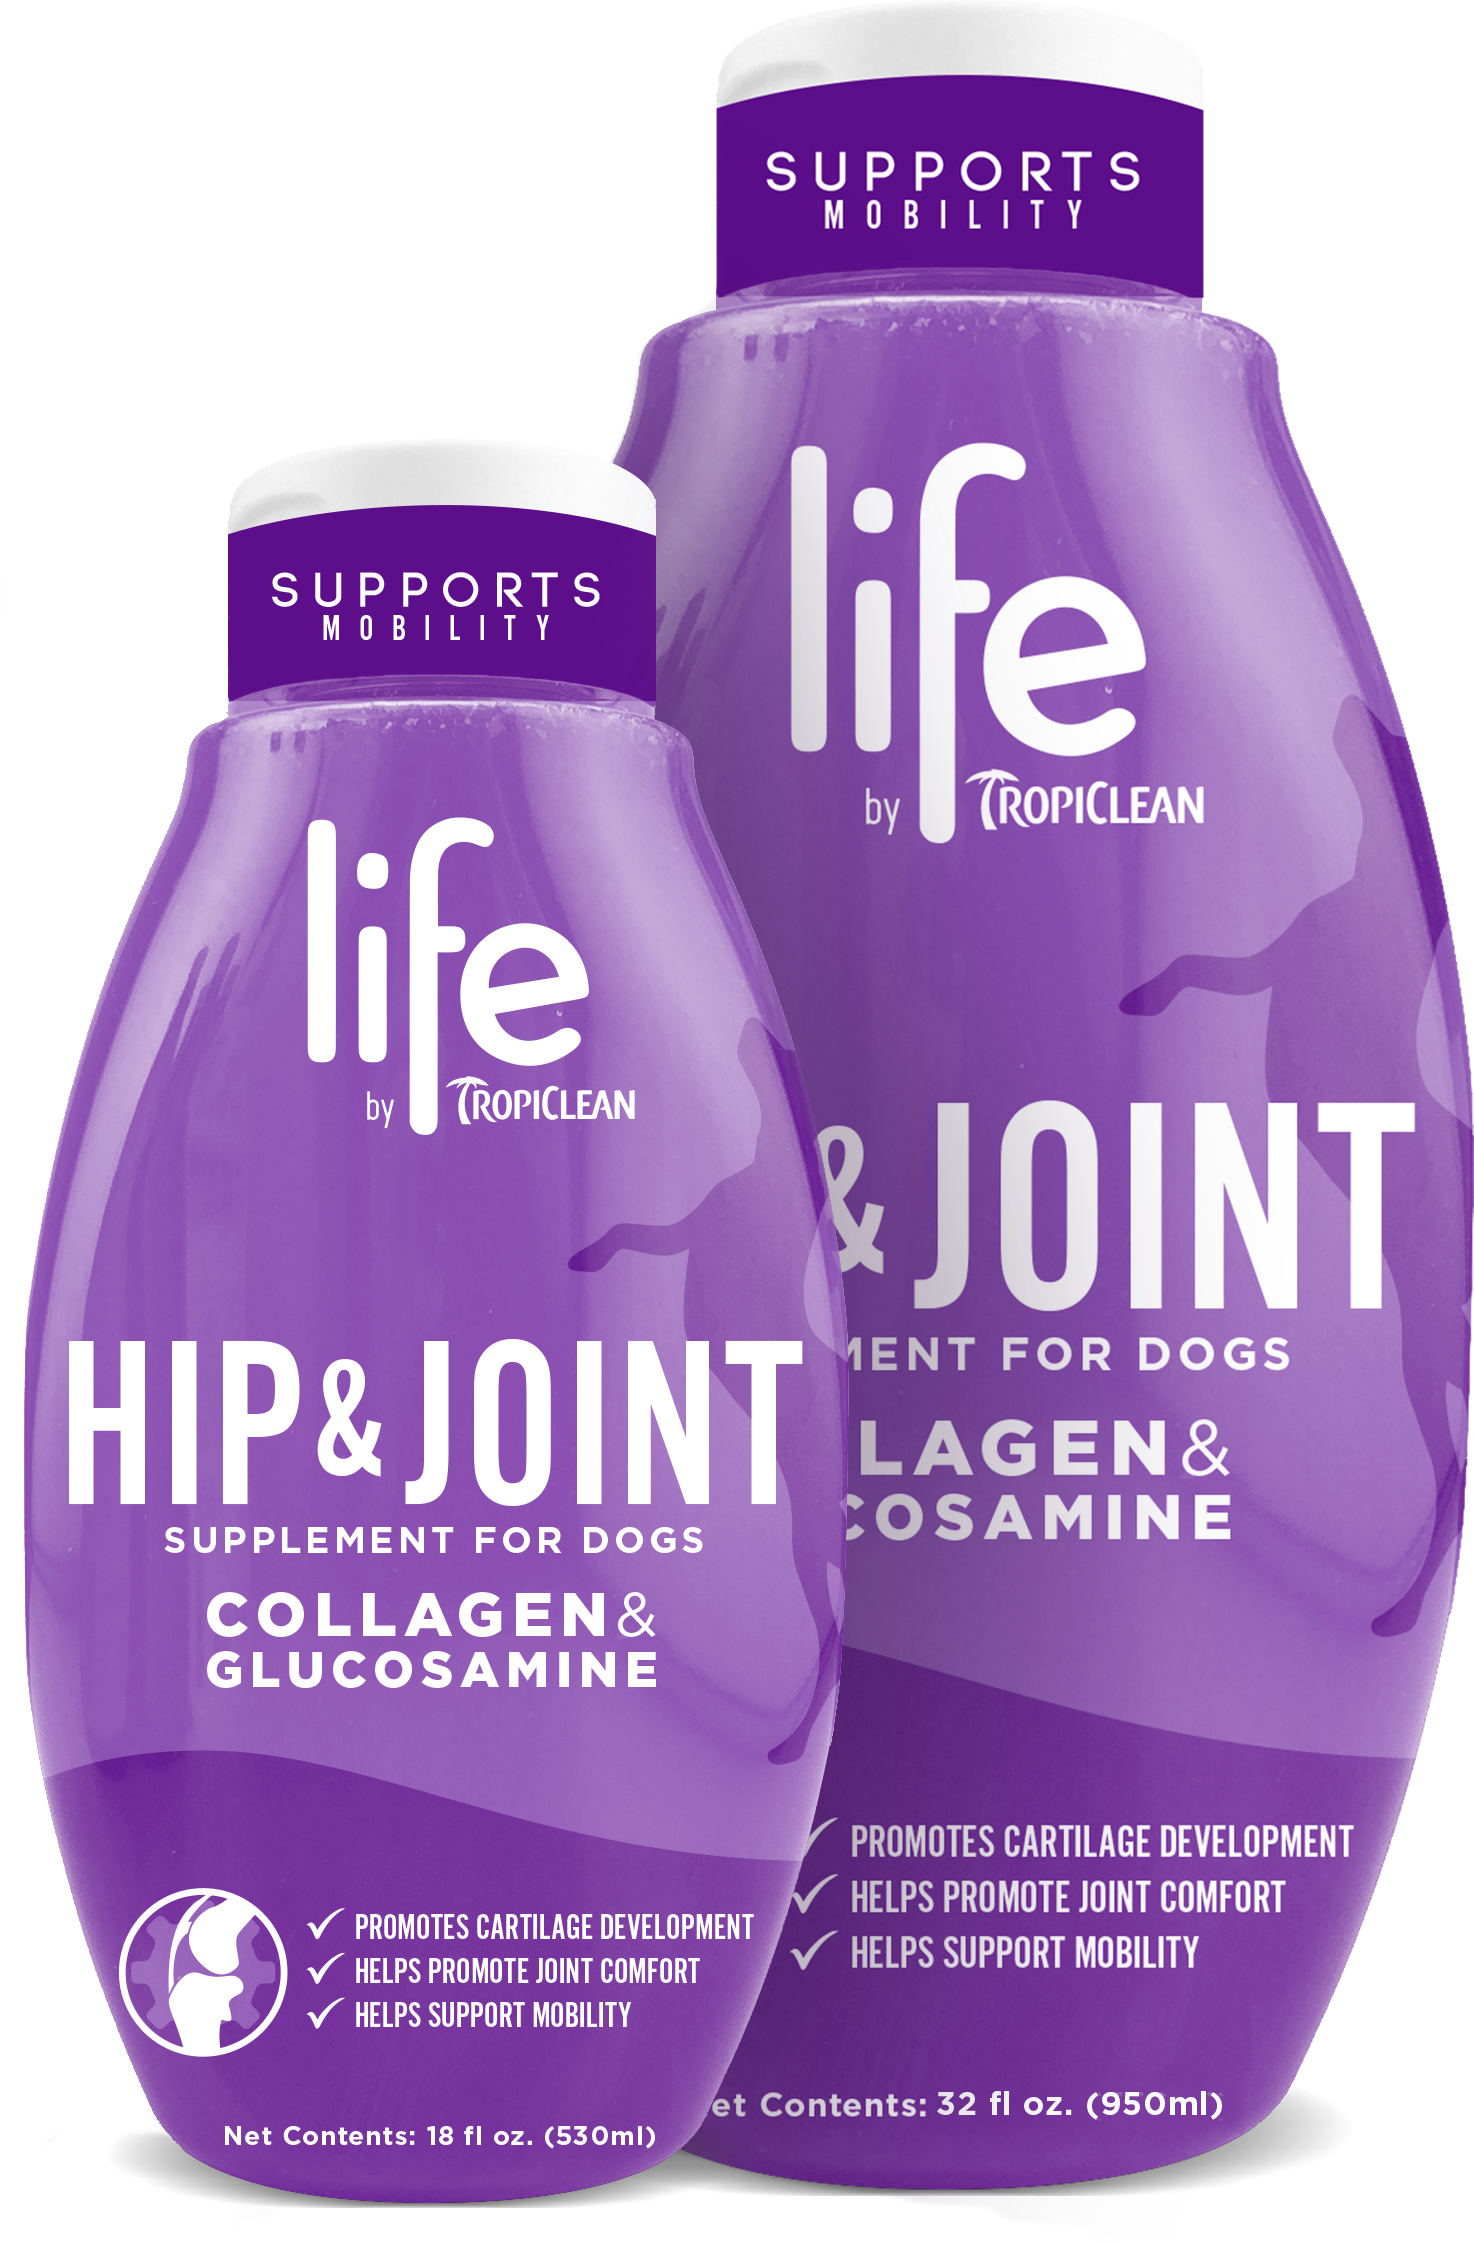 TropiClean Pet Products - Life by TropiClean Hip & Joint Supplement for Dogs